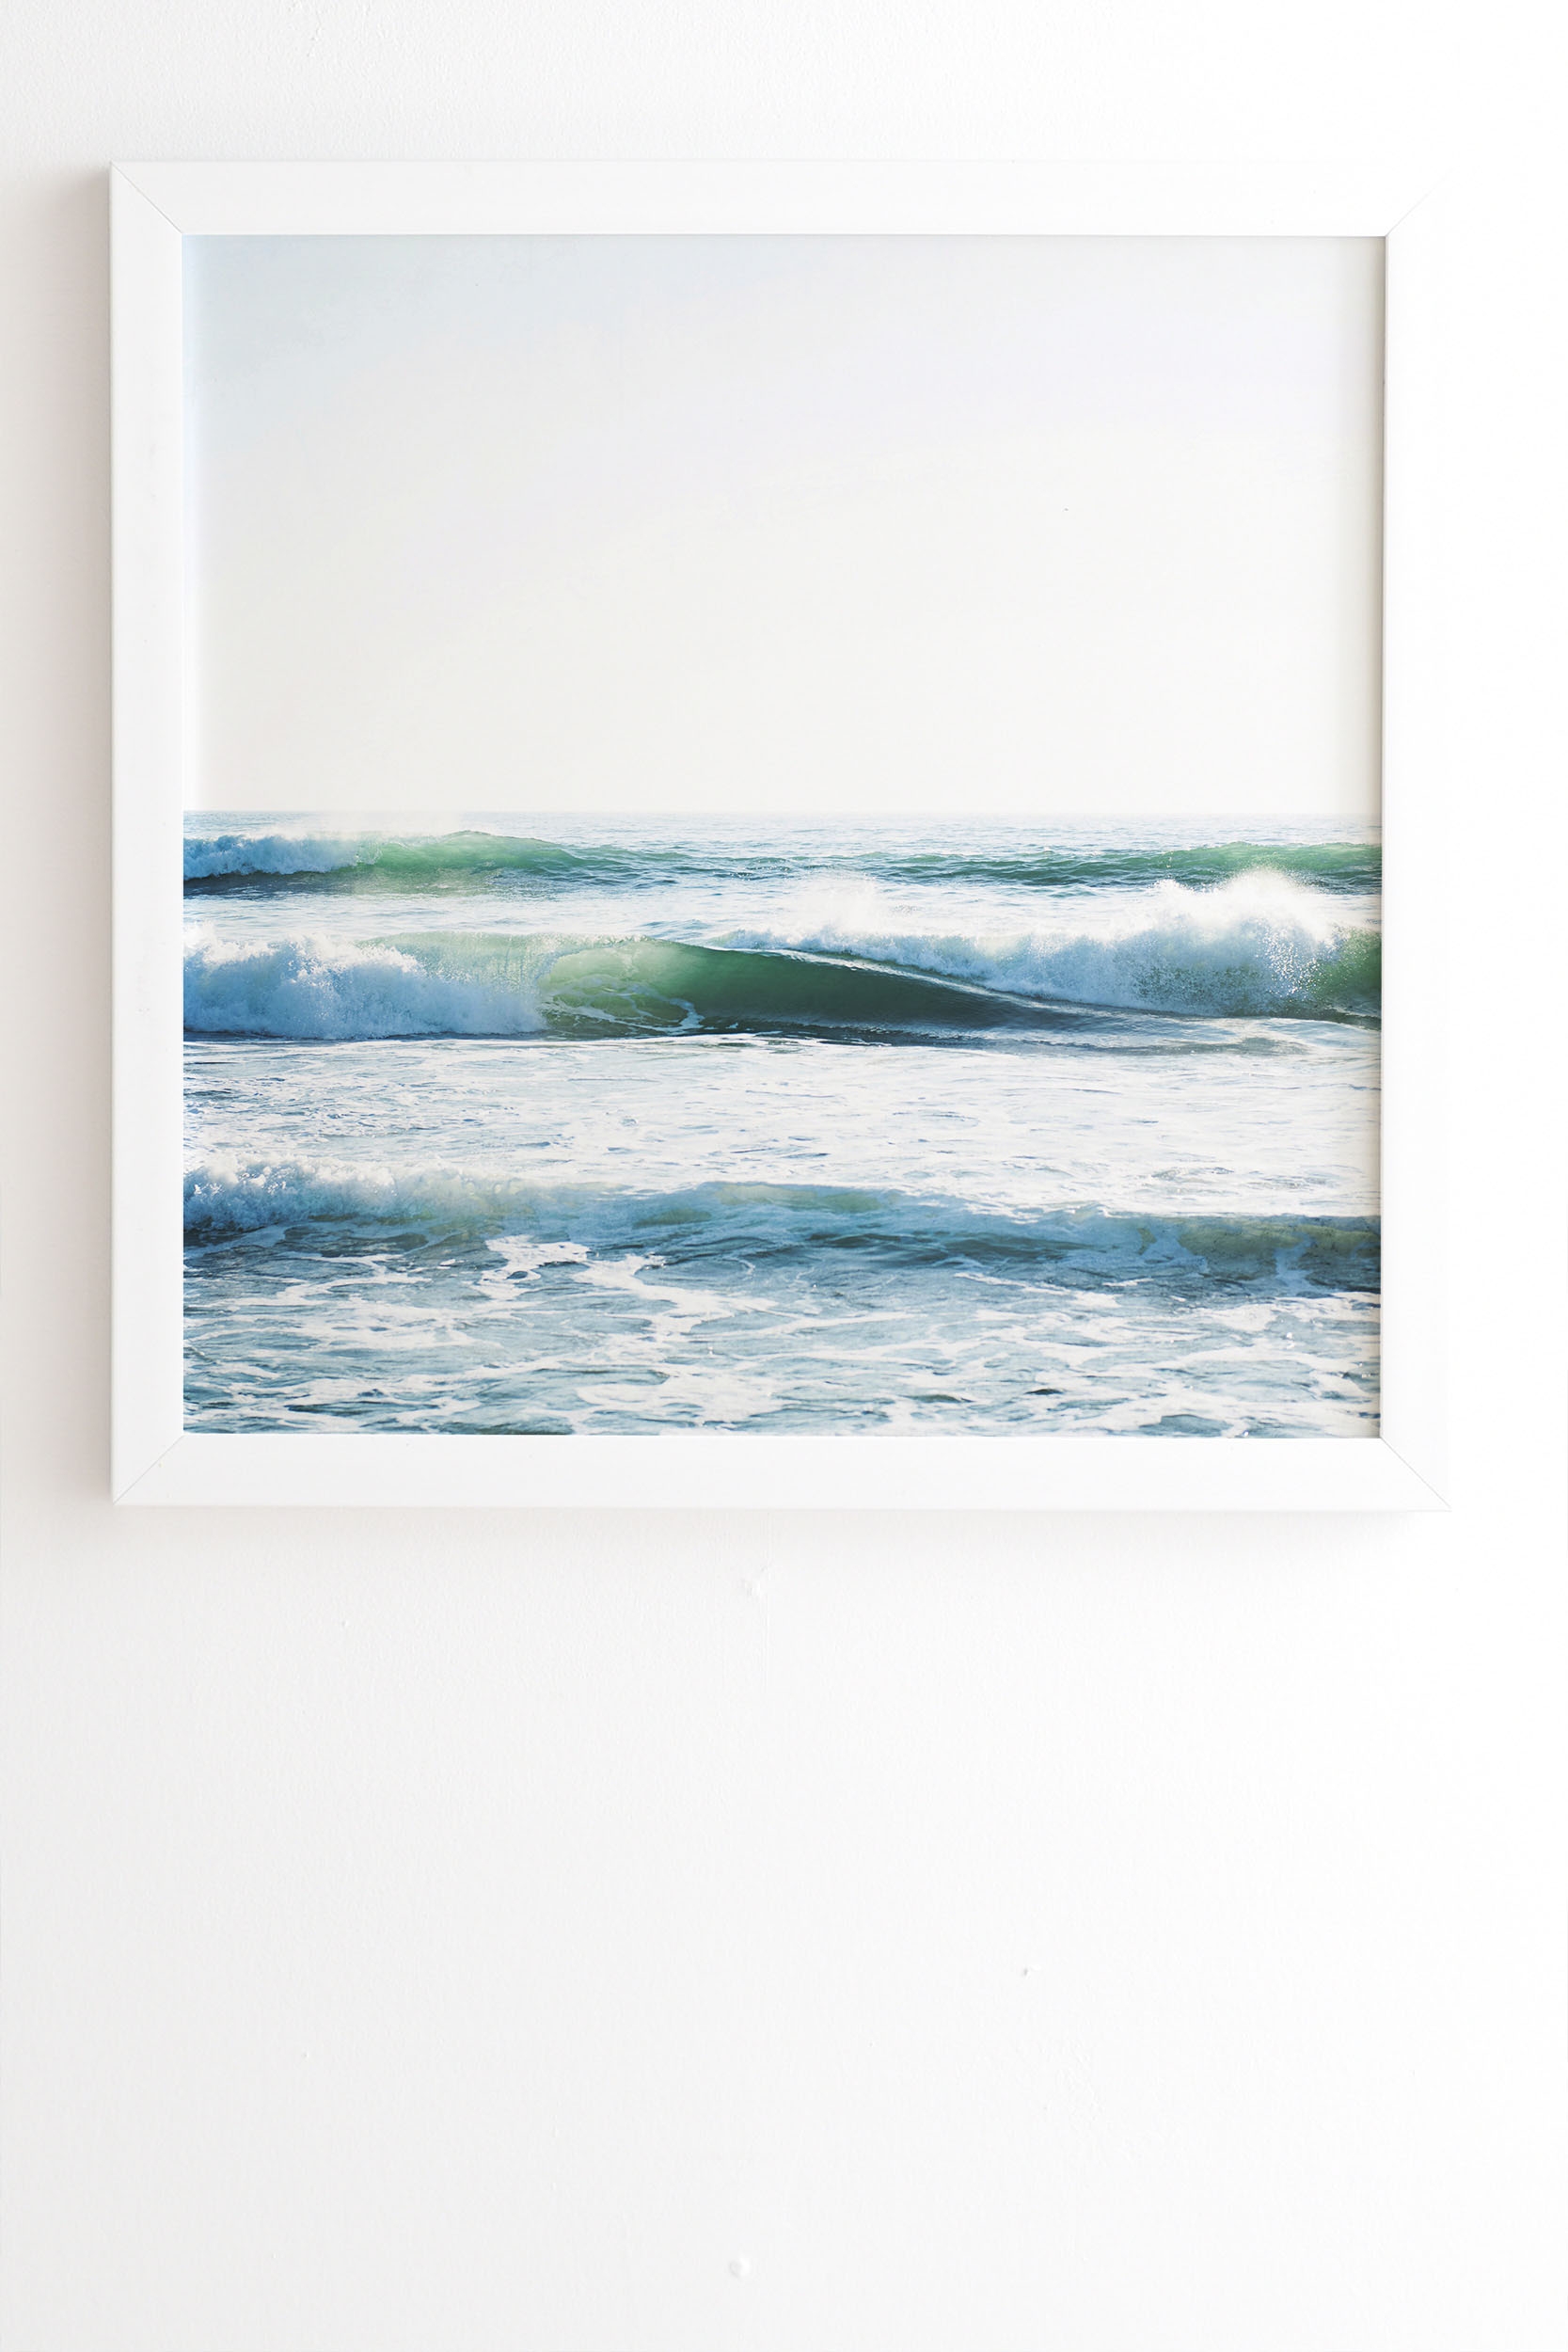 Ride Waves by Bree Madden - Framed Wall Art Basic White 20" x 20" - Image 1